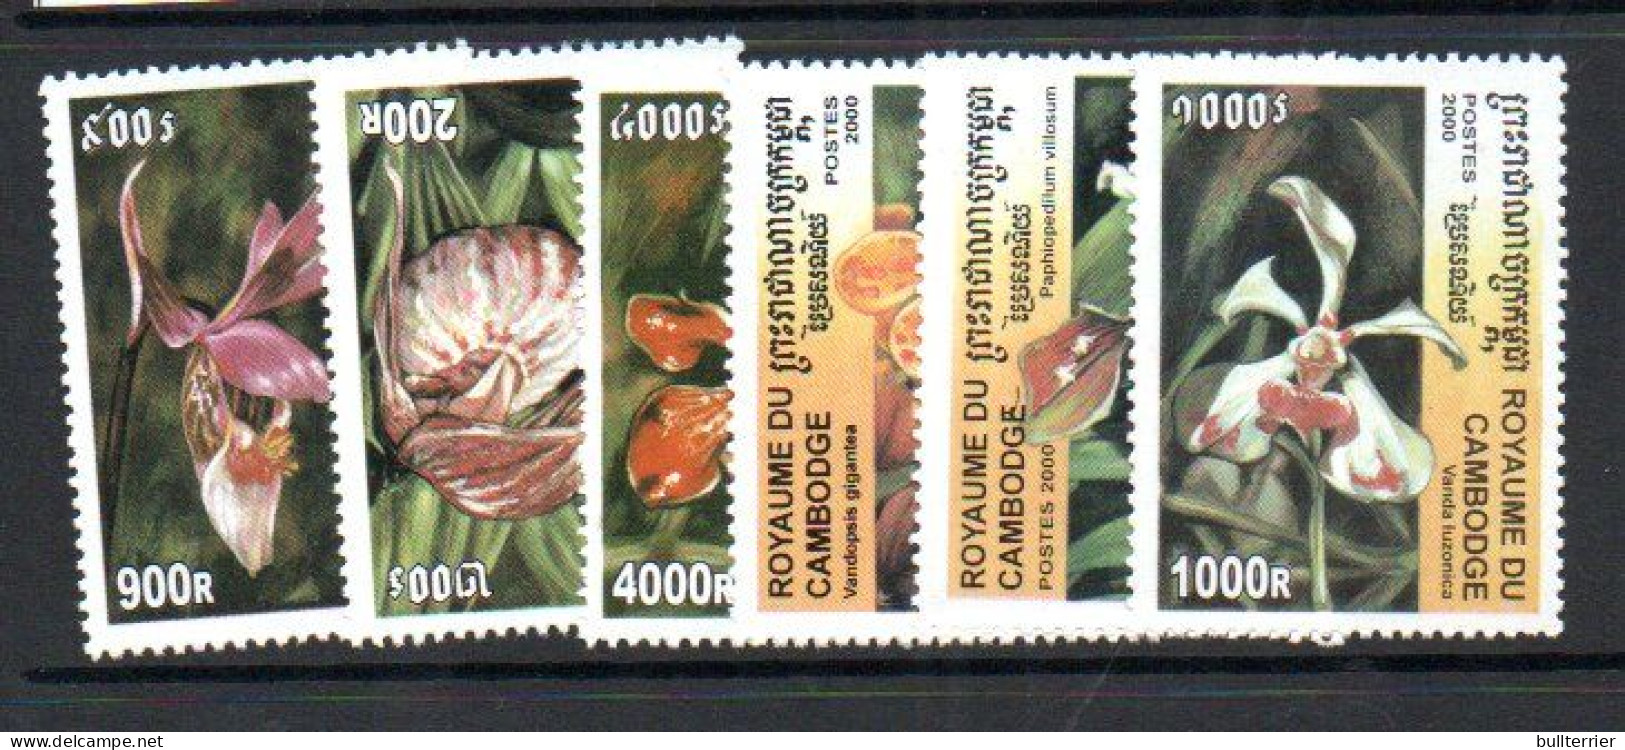 CAMBODIA -  2000 -  ORCHIDS SET OF 6  MINT NEVER HINGED, - Cambodja